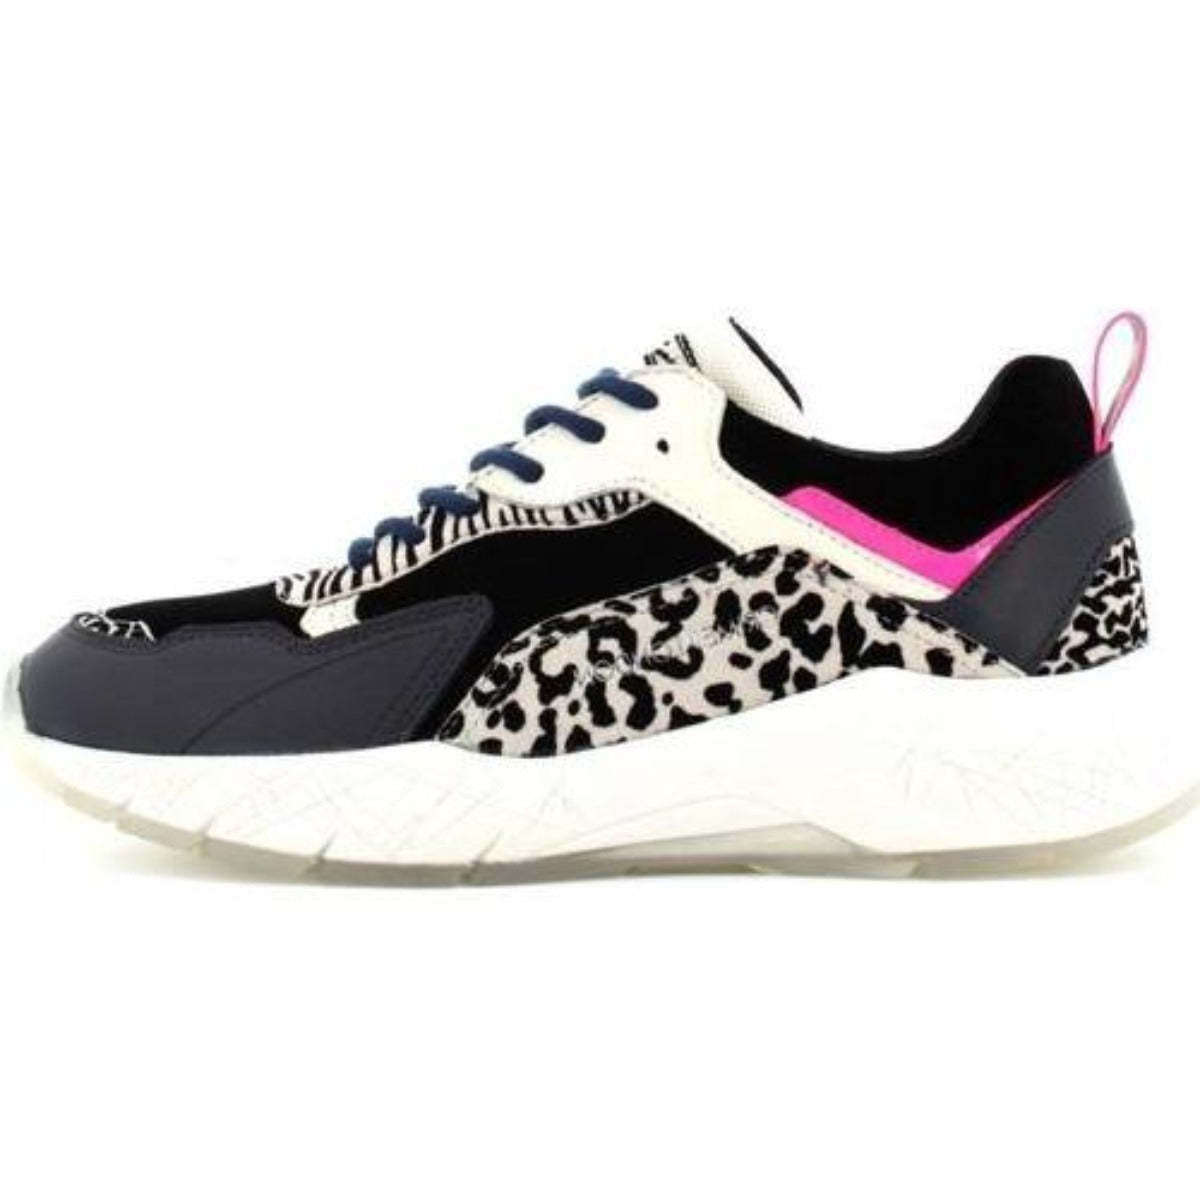 CRIME Donna sneakers